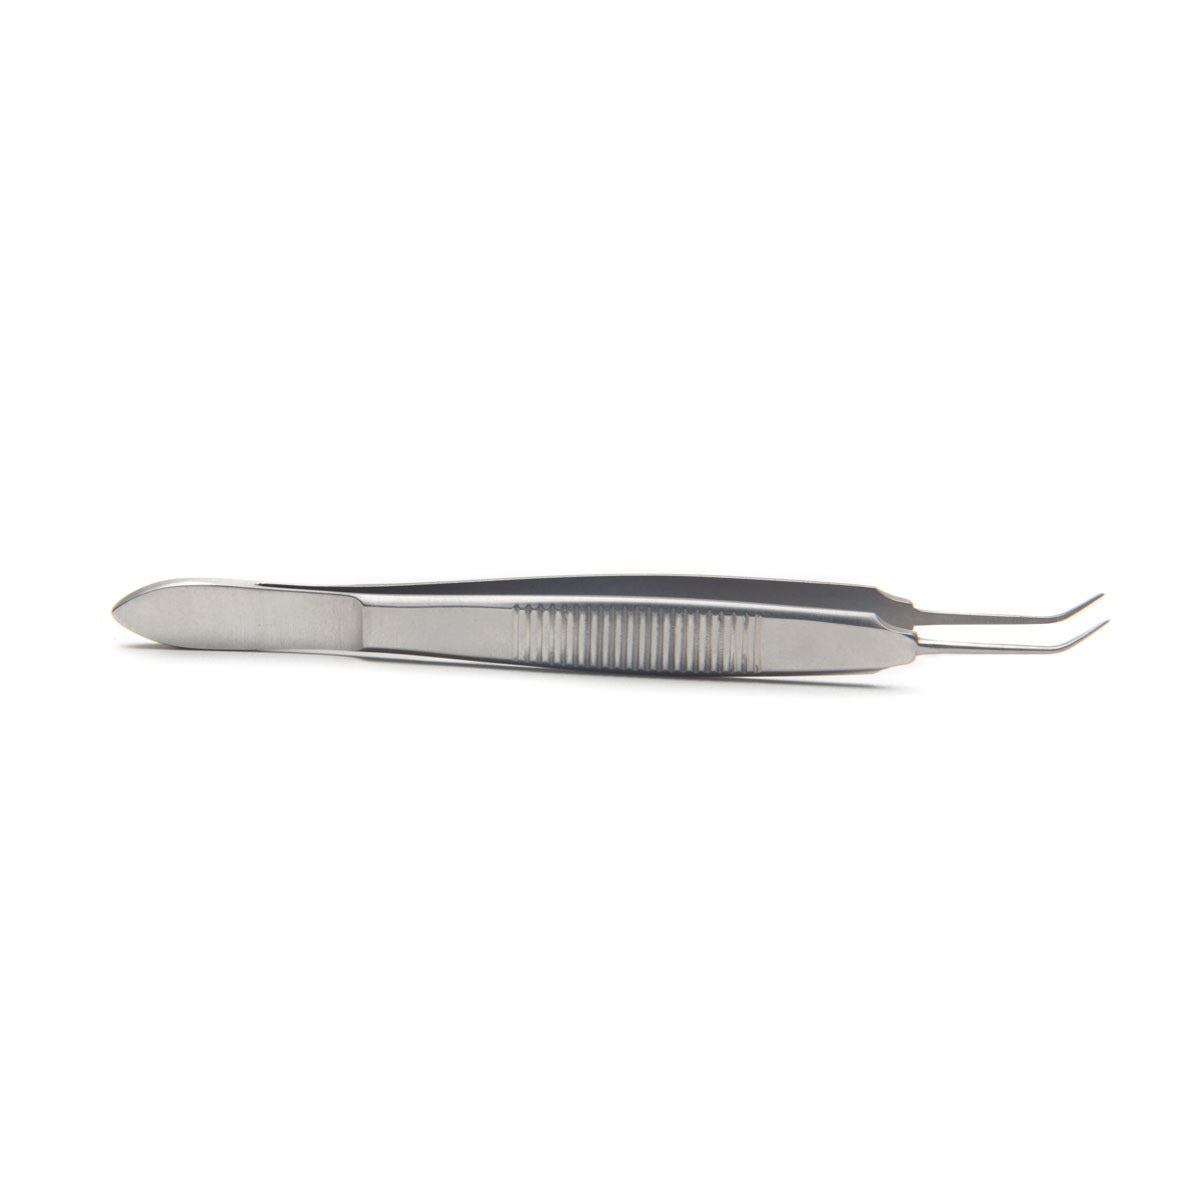 Kelman McPherson Forceps 8.5cm (3.35"), Angled, 7.5mm Smooth Jaw, Stainless Steel